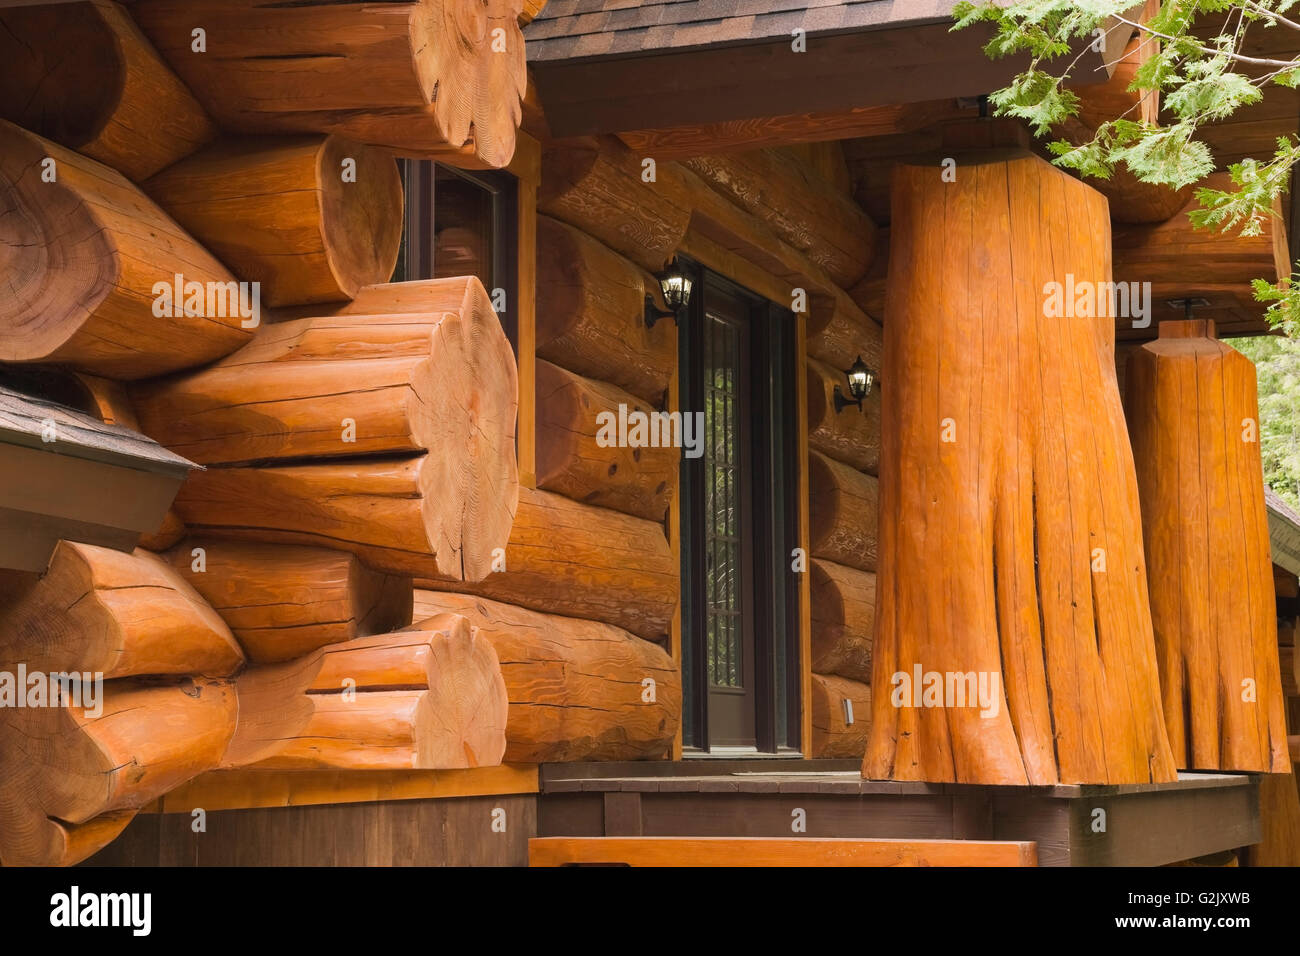 Handcrafted red cedar log home facade with steps and veranda in summer Quebec Canada This image is property released CUPR0277 Stock Photo